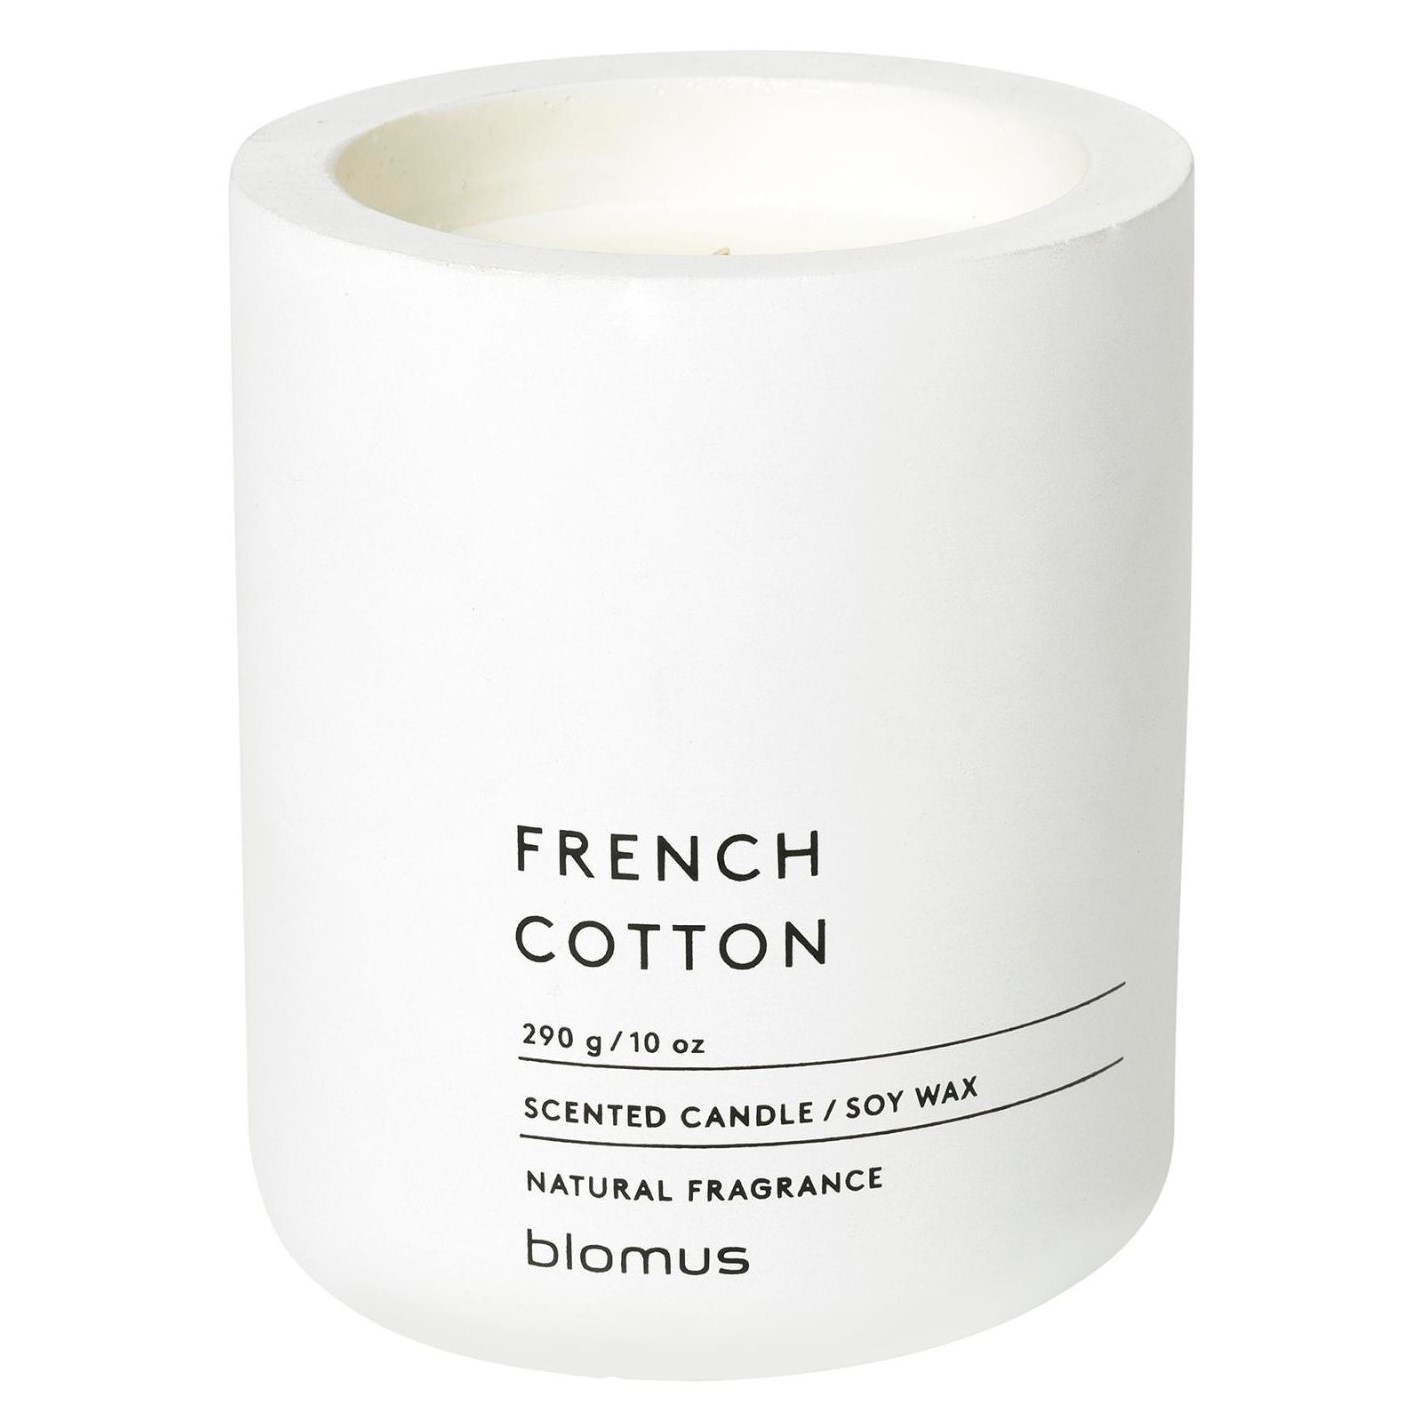 Läs mer om blomus Scented Candle Lily White French Cotton 290 g